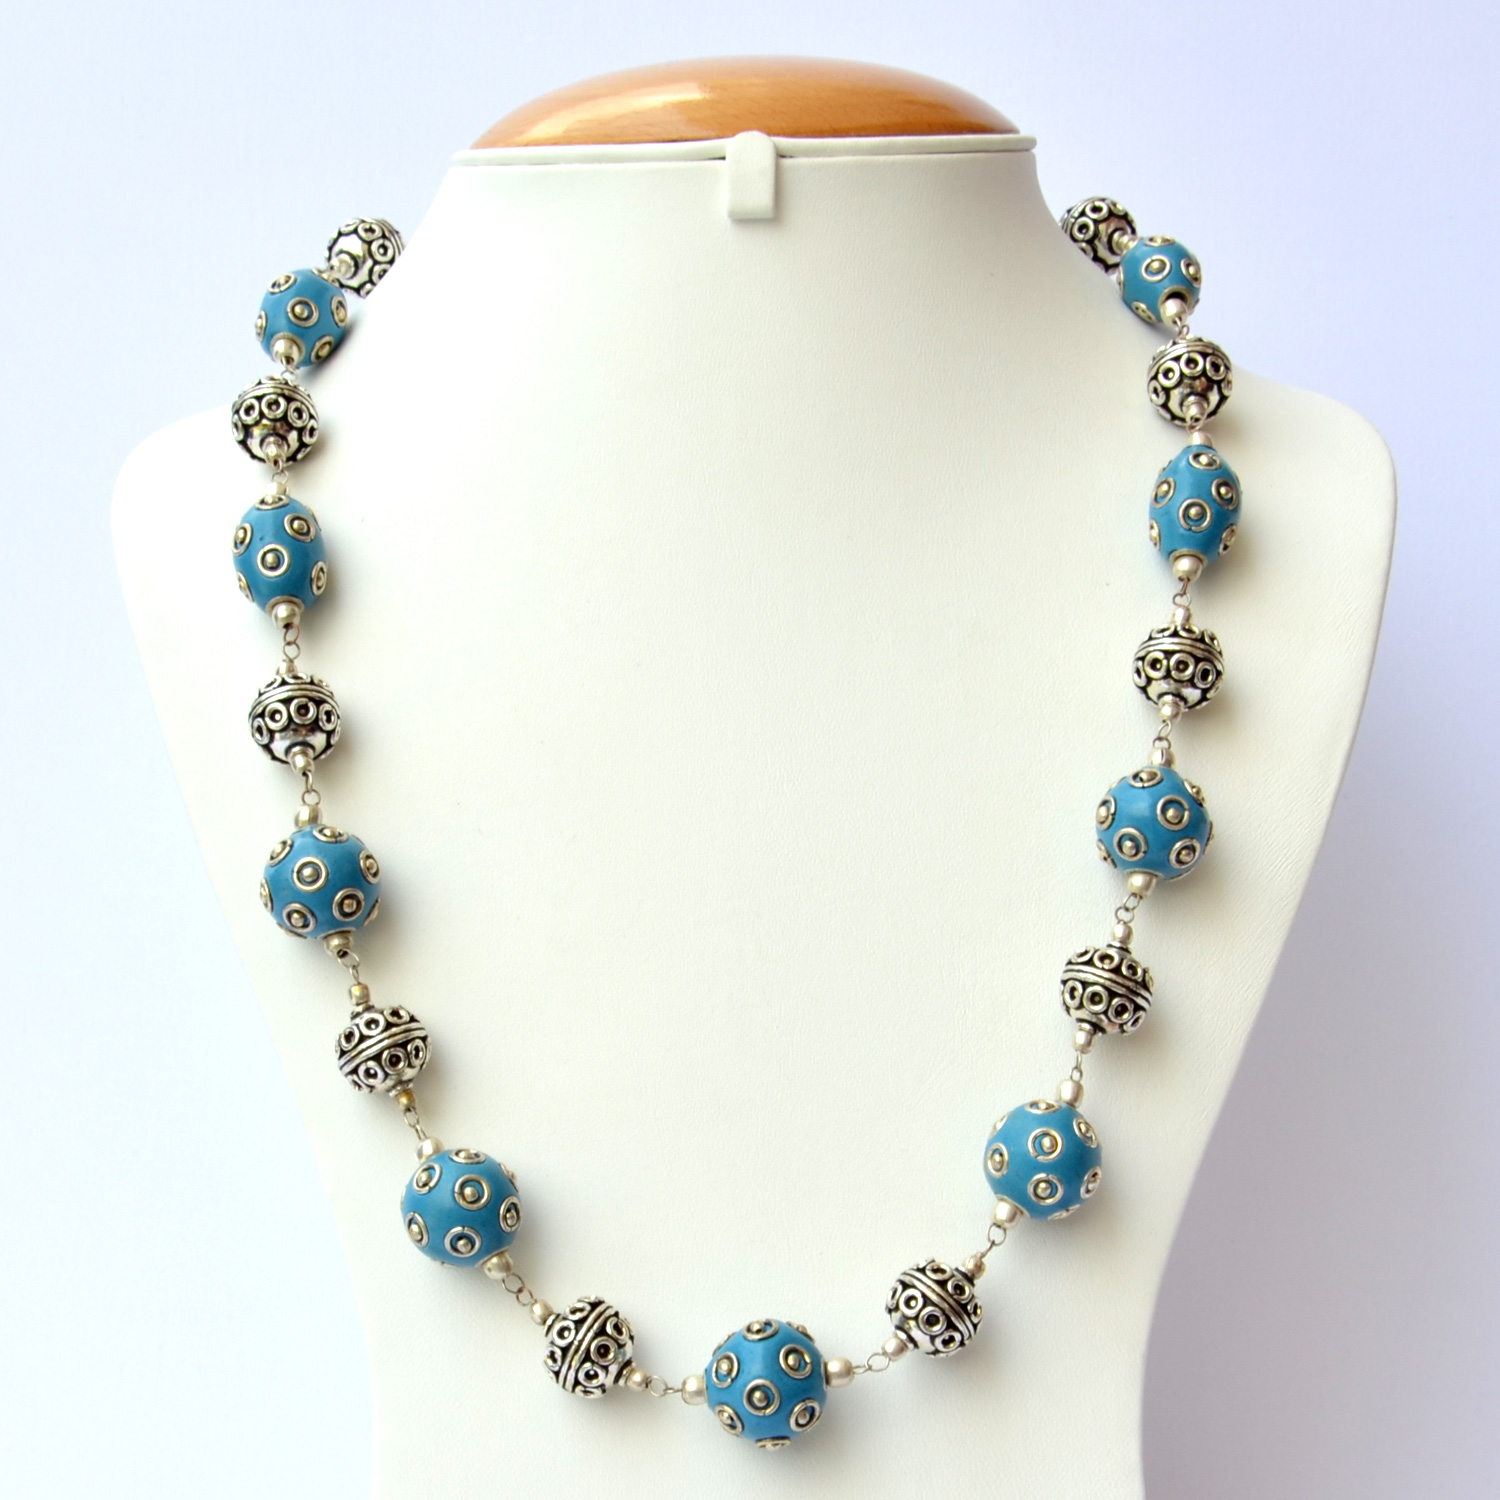 Blue Handmade Necklace Studded with Silver Plated Rings & Balls ...